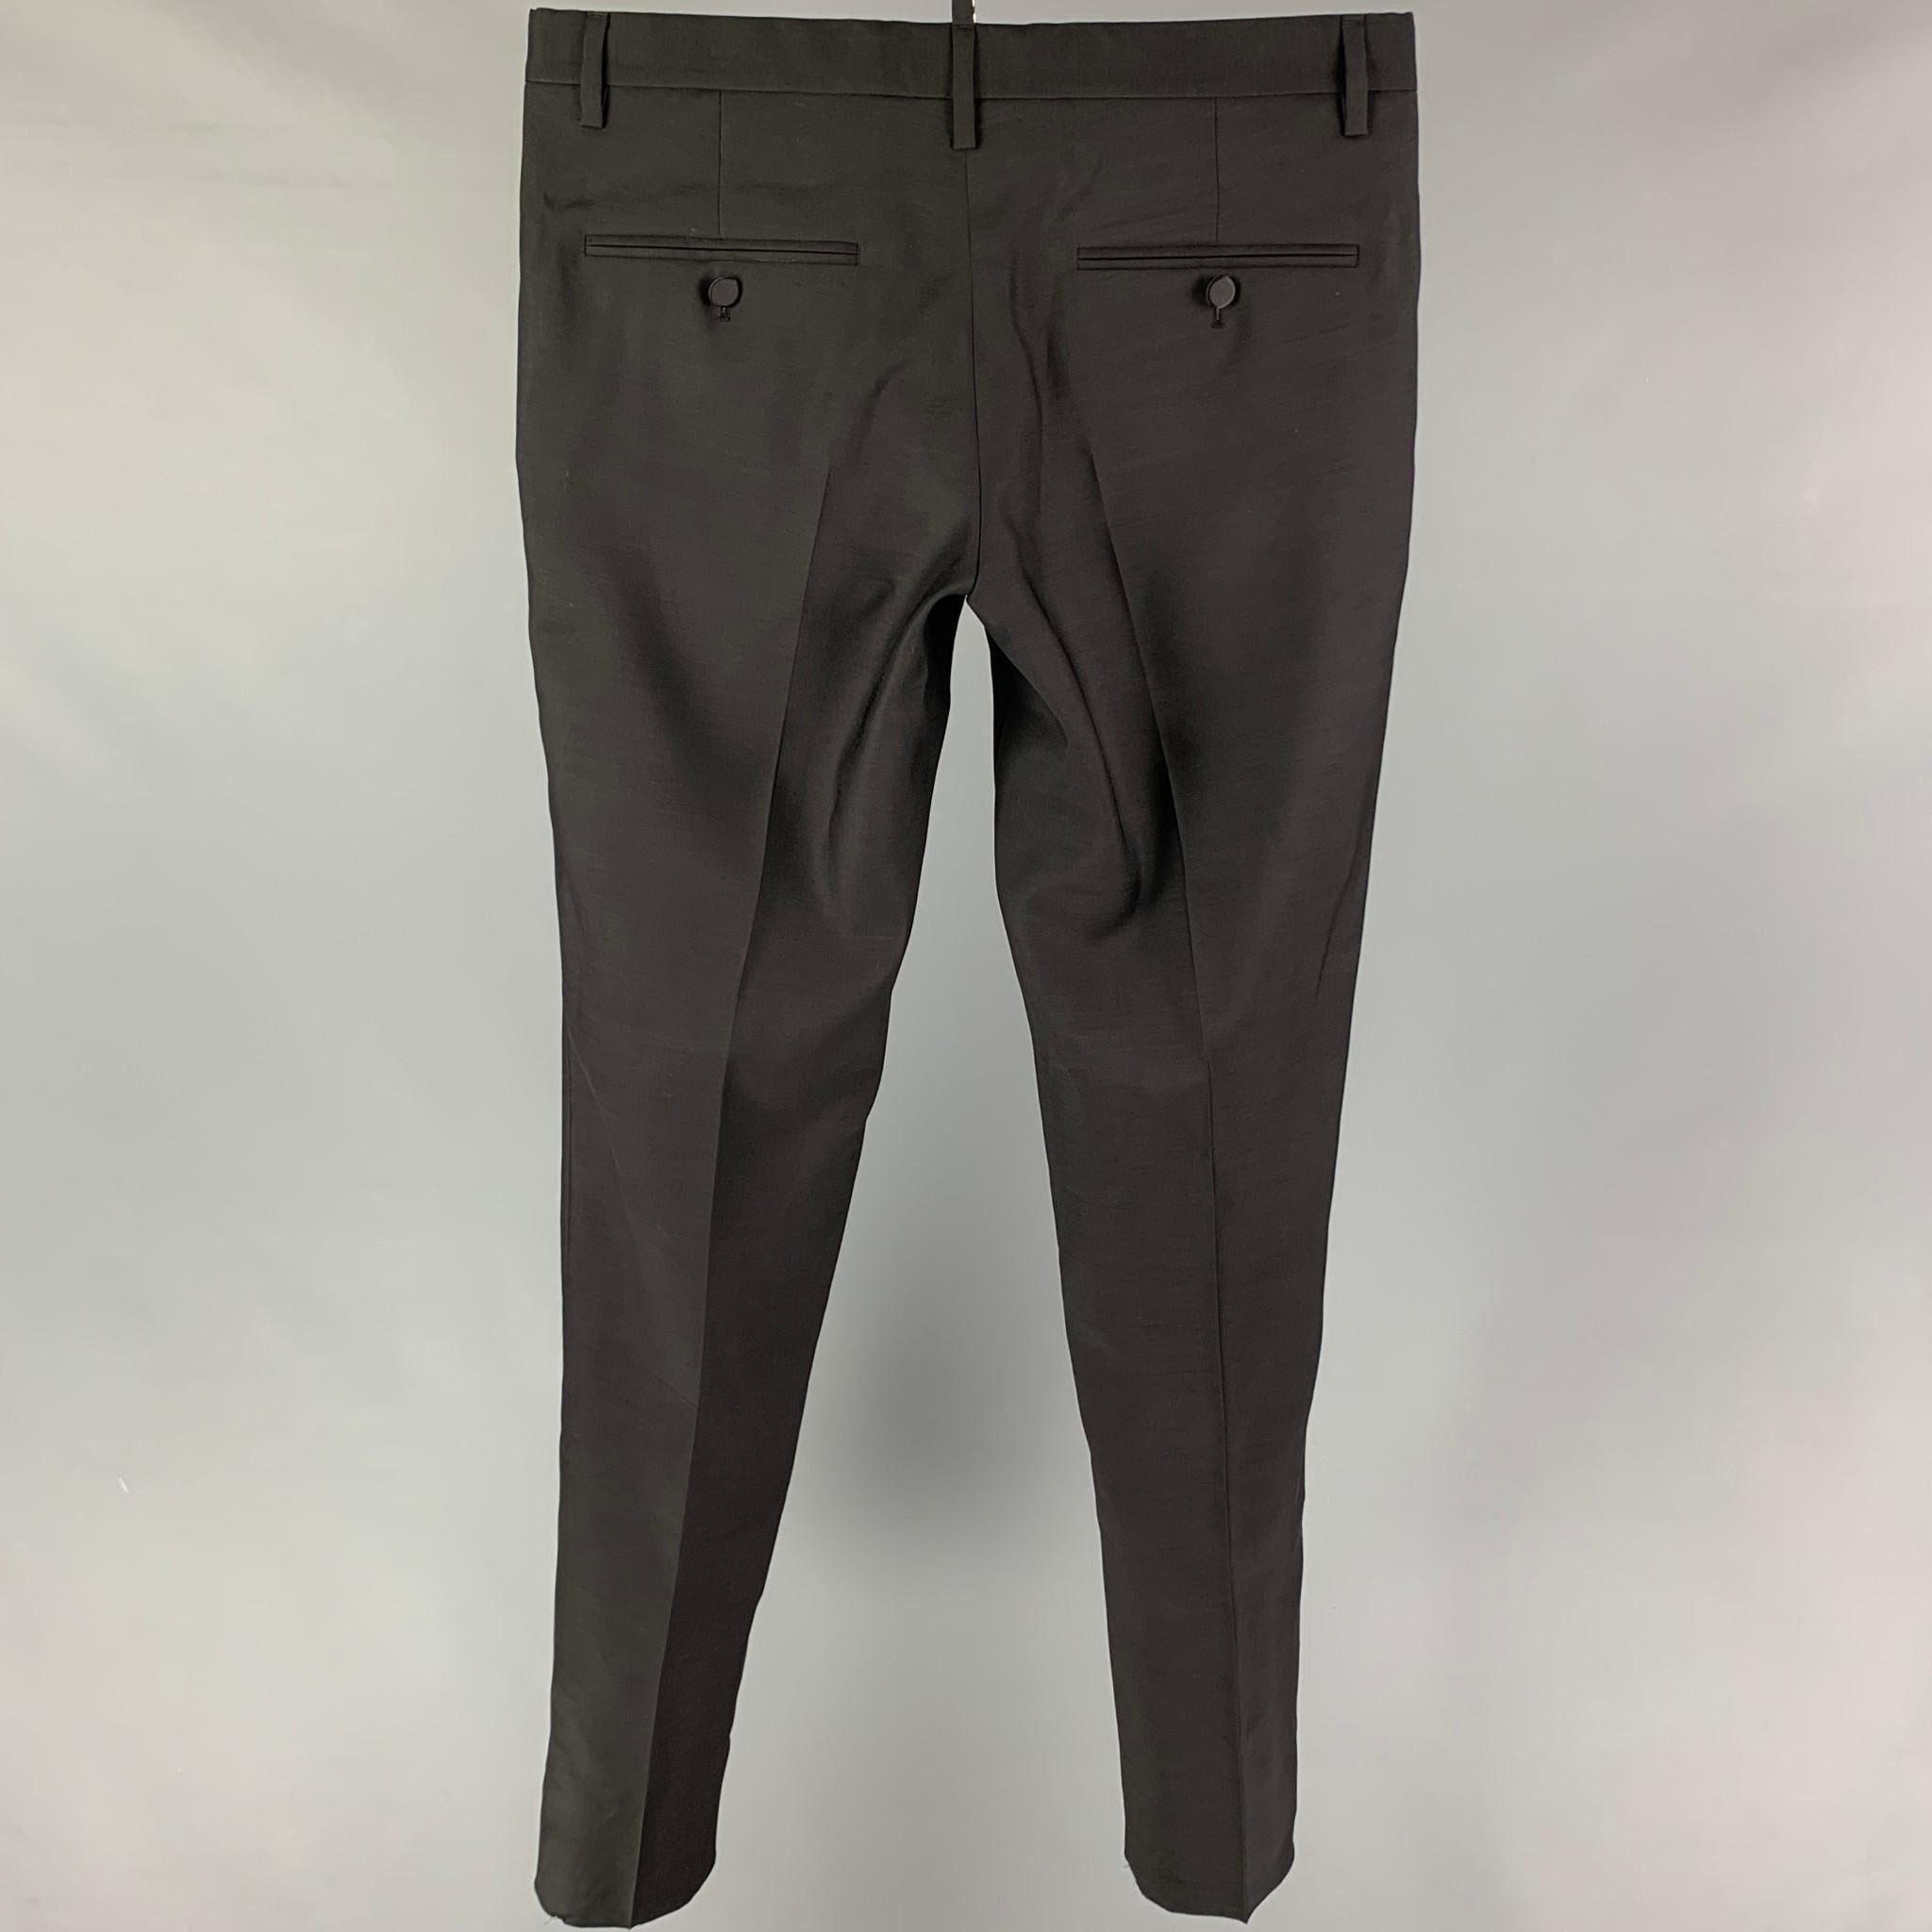 DSQUARED2 dress pants comes in a black cotton / silk featuring a slim fit, front tab, and a buttno fly closure. Made in Italy. 

Very Good Pre-Owned Condition.
Marked: 48

Measurements:

Waist: 34 in.
Rise: 10 in.
Inseam: 36 in. 